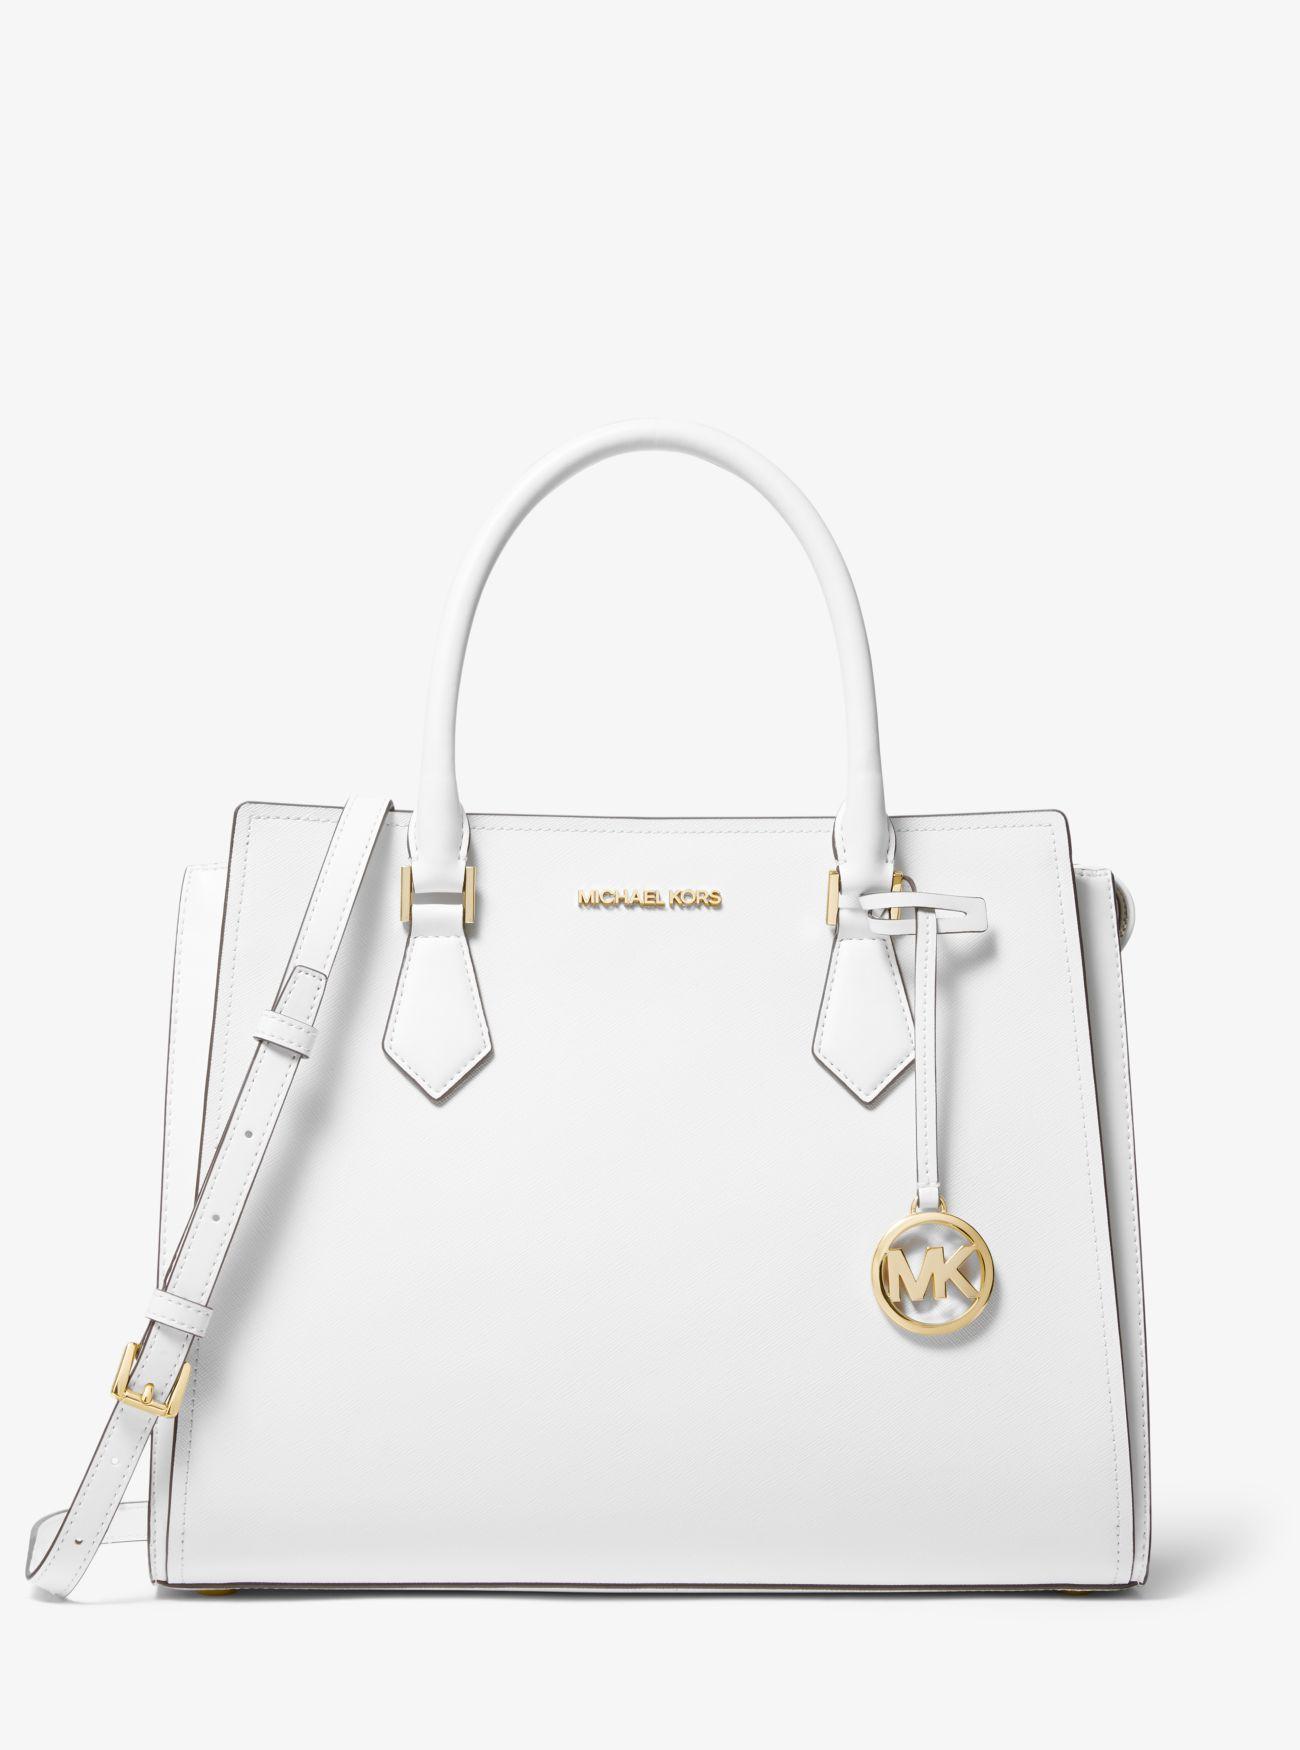 Michael Kors Hope Large Saffiano Leather Satchel in White | Lyst